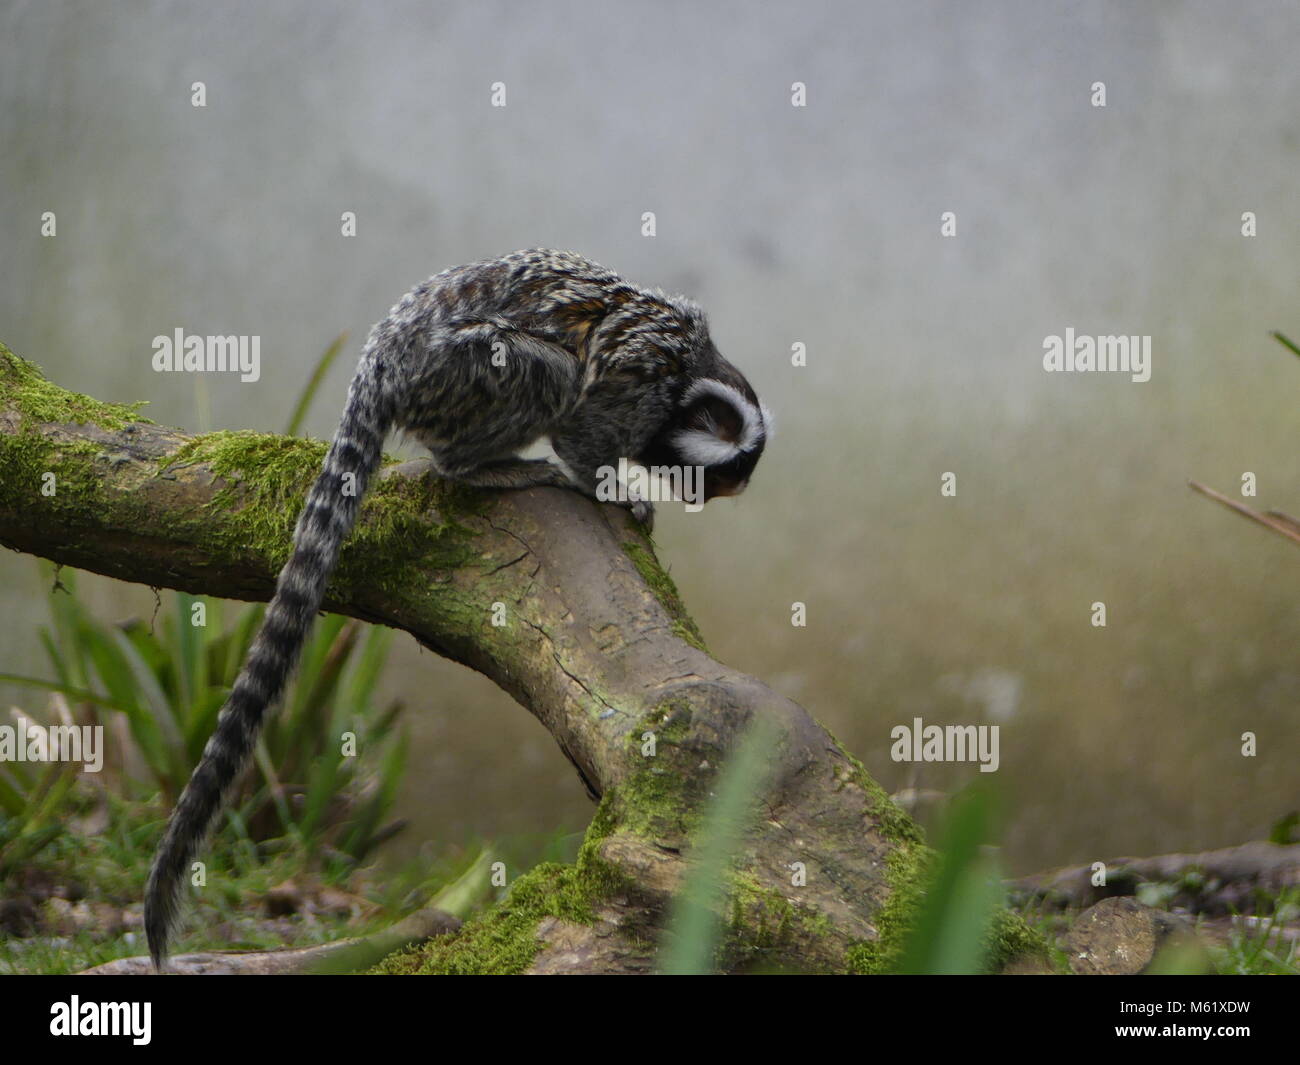 Common Marmoset sitting on a branch in the mist Stock Photo